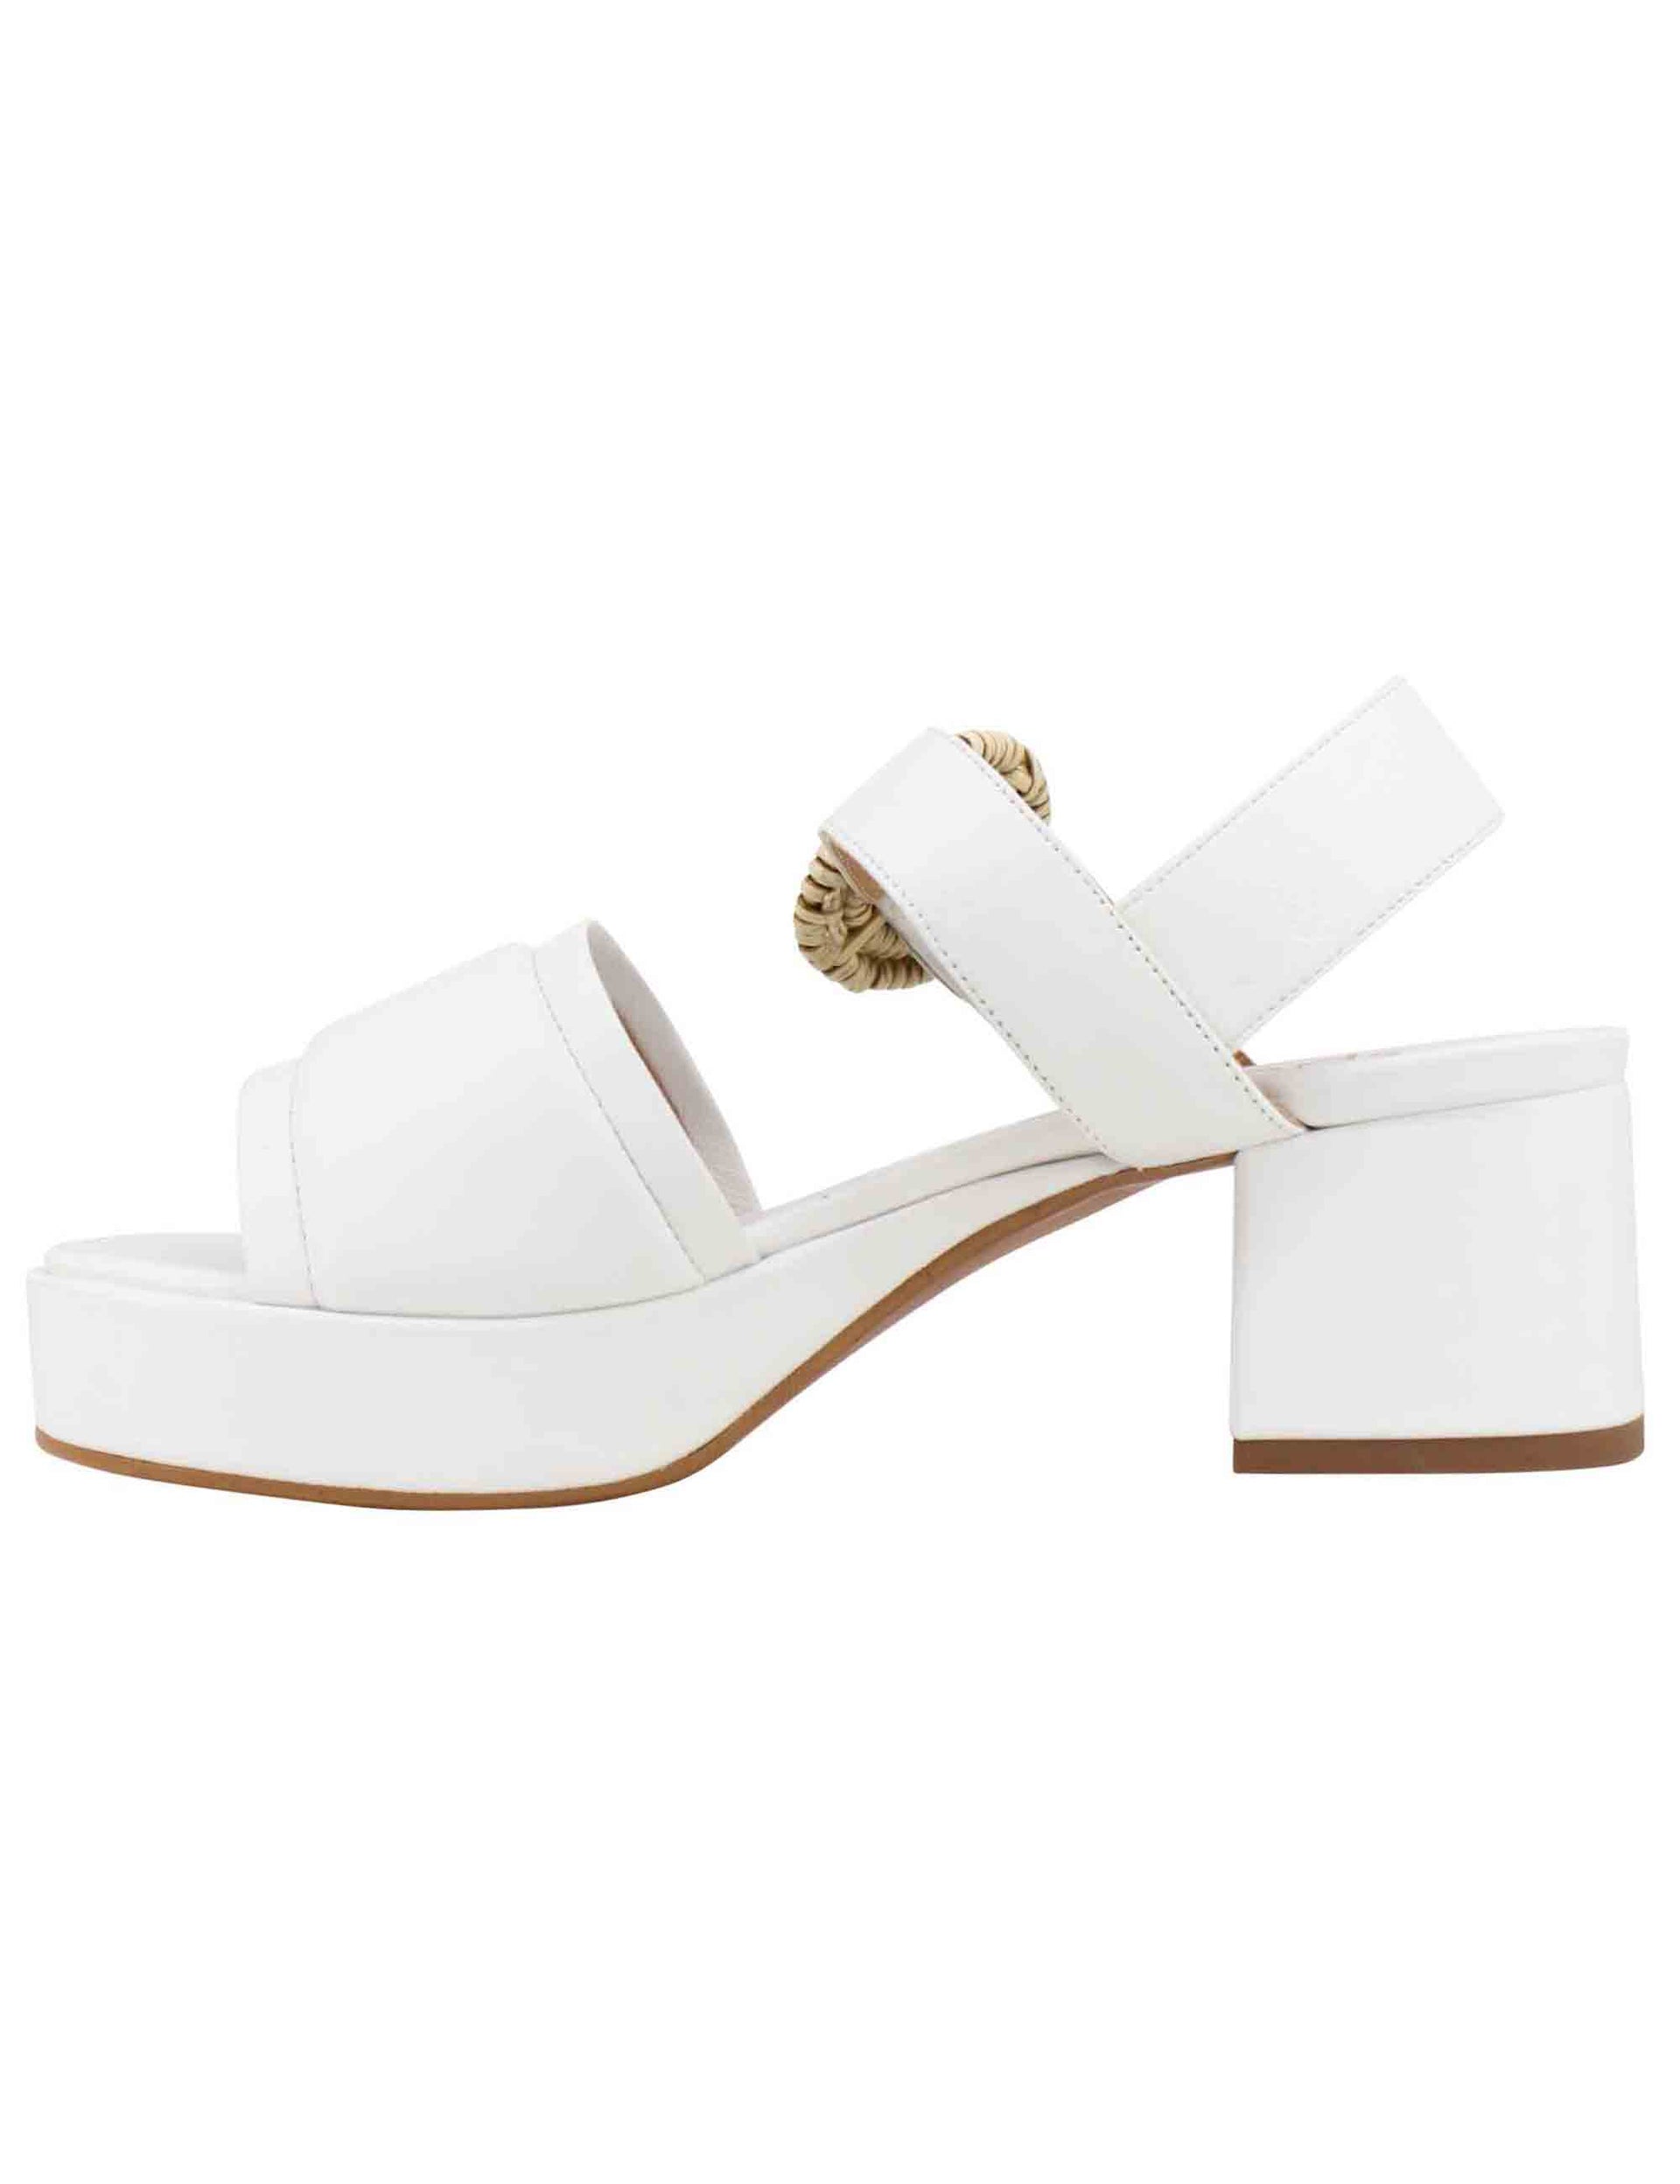 Women's white leather sandals with covered buckle and heel and plateau